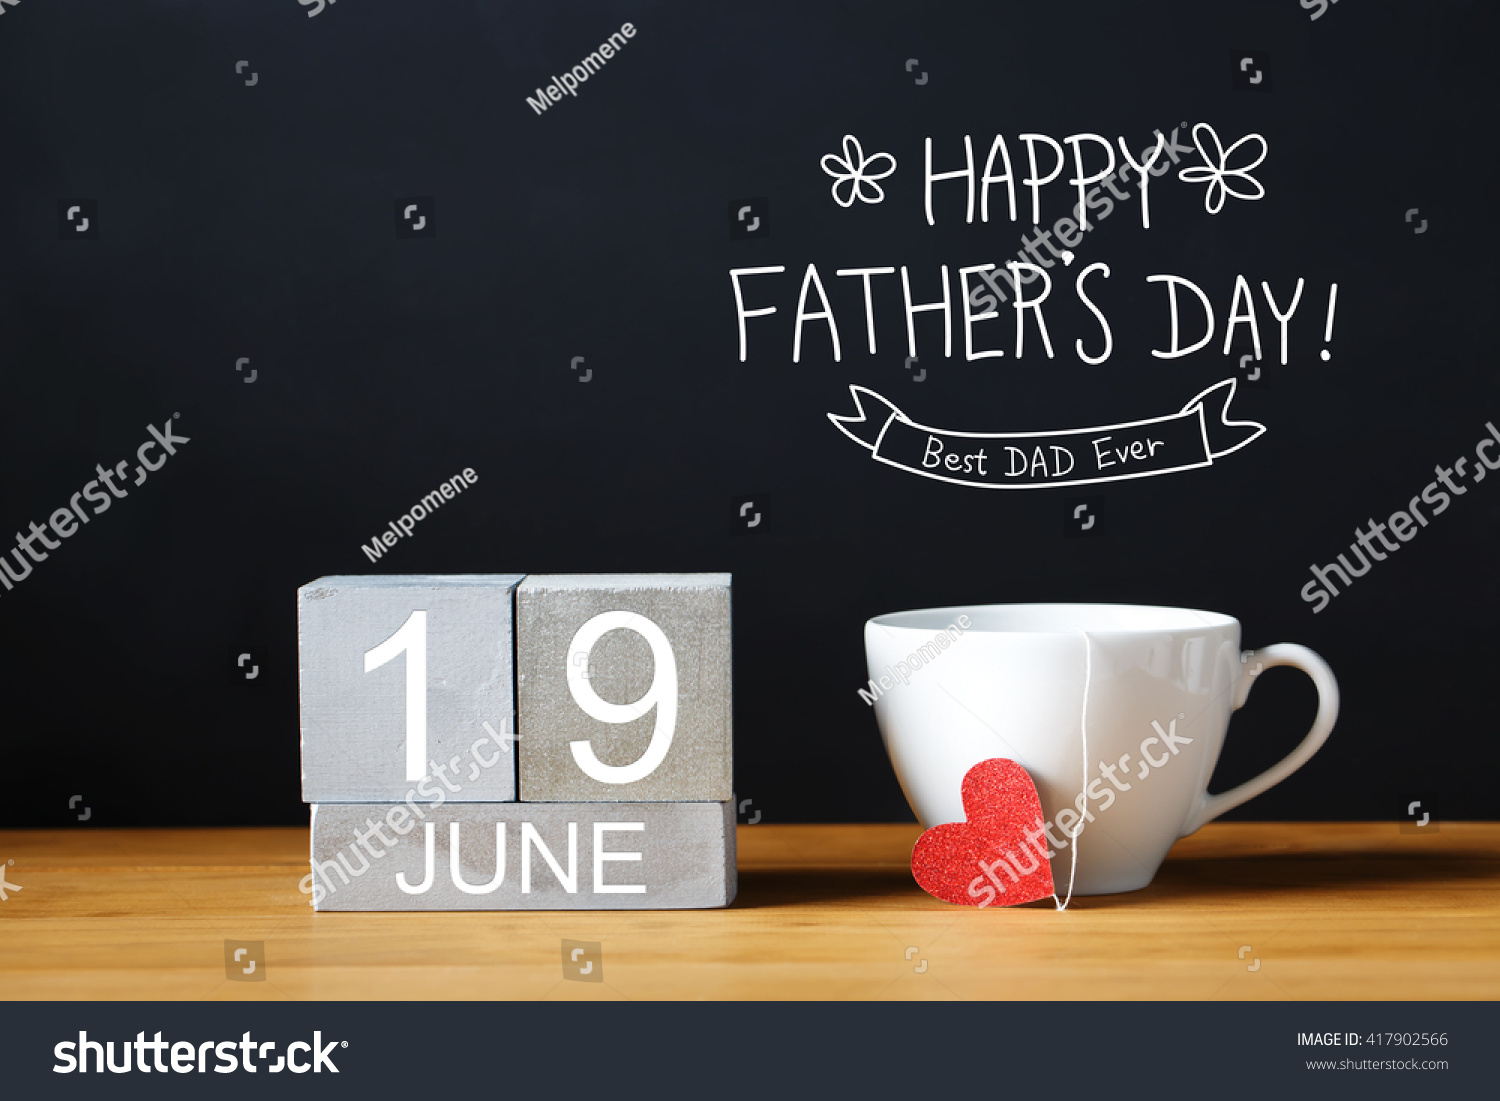 Fathers Day message with coffee cup with wooden blocks #417902566